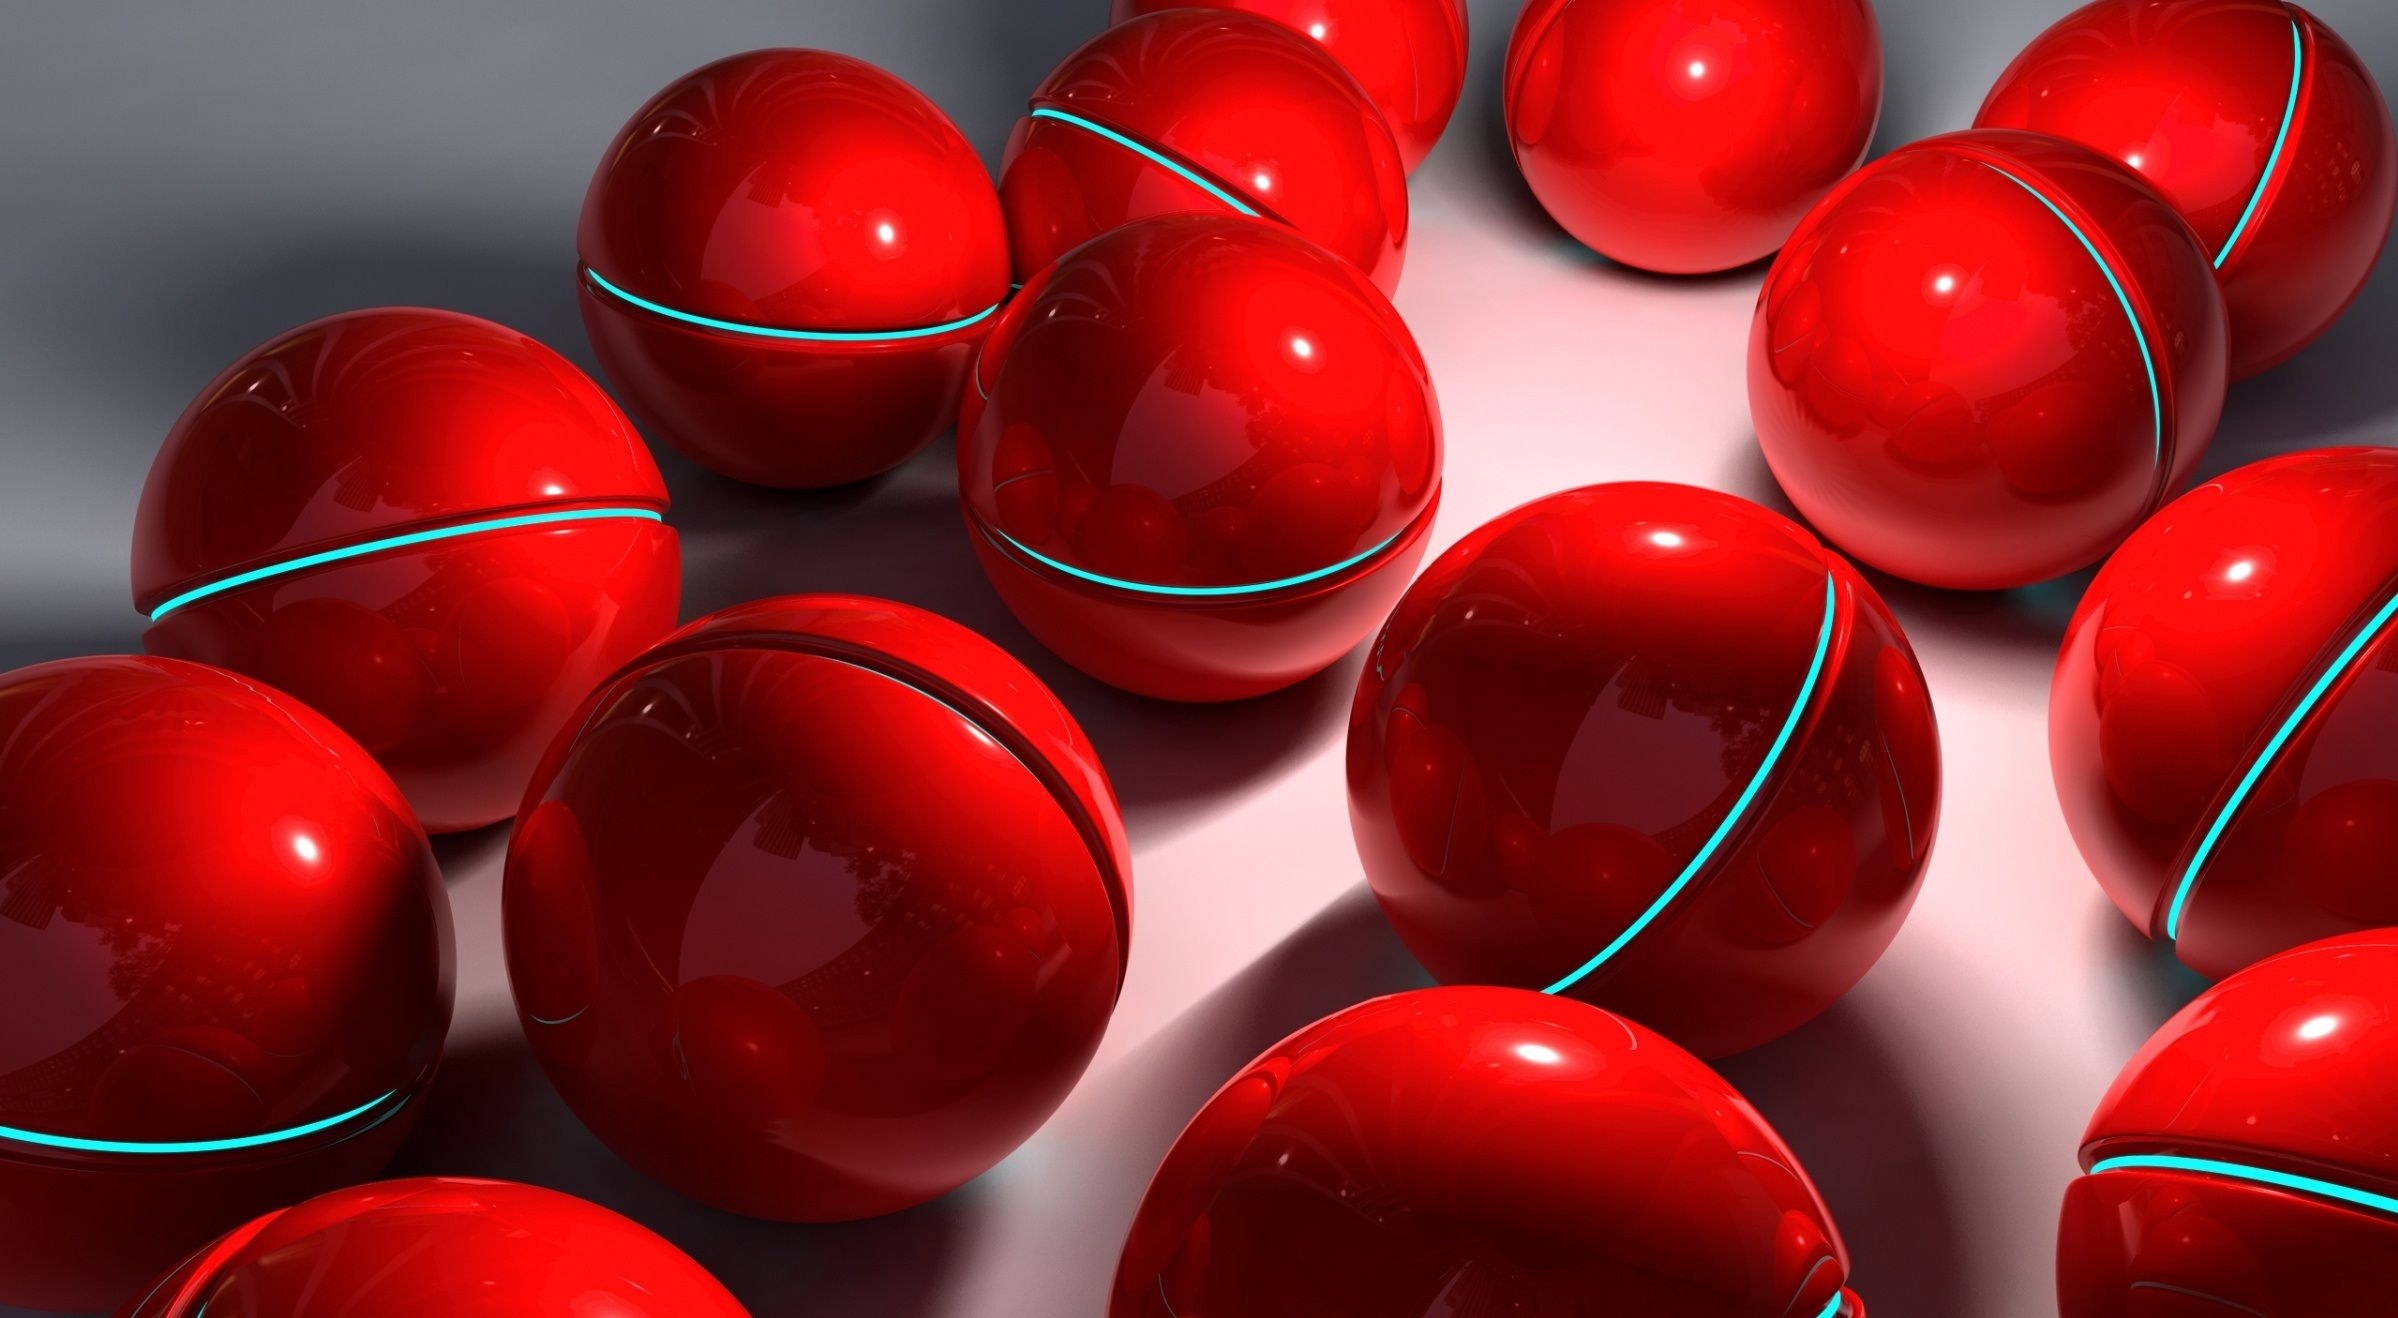 3d, sphere, red, glass, balls